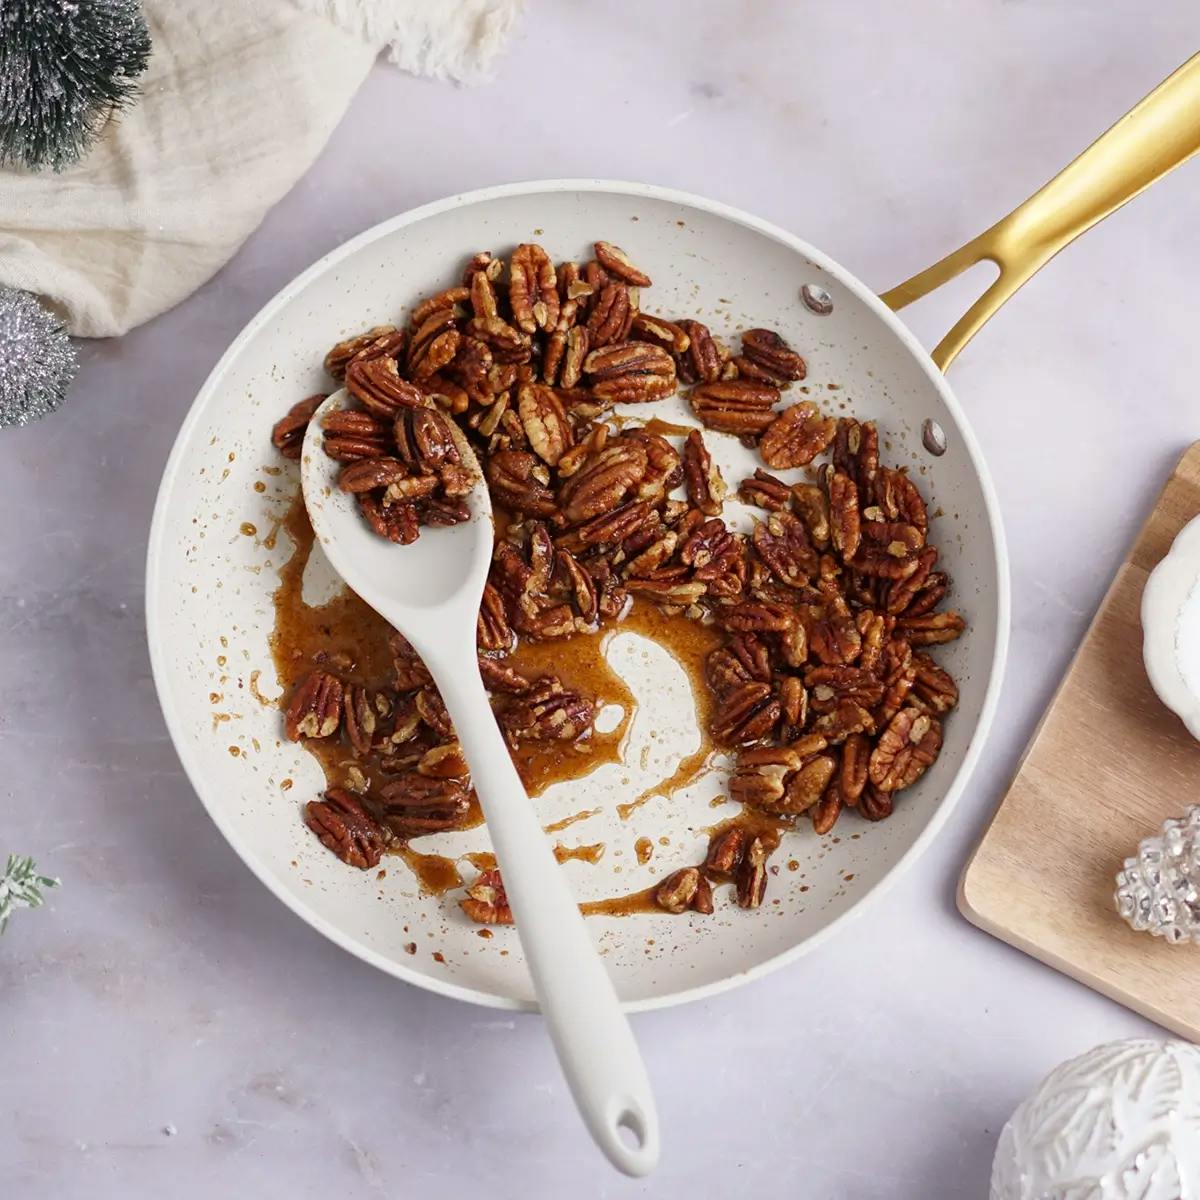 Coating pecans in a sweet syrup ready to add to a Christmas or Thanksgiving green salad recipe.